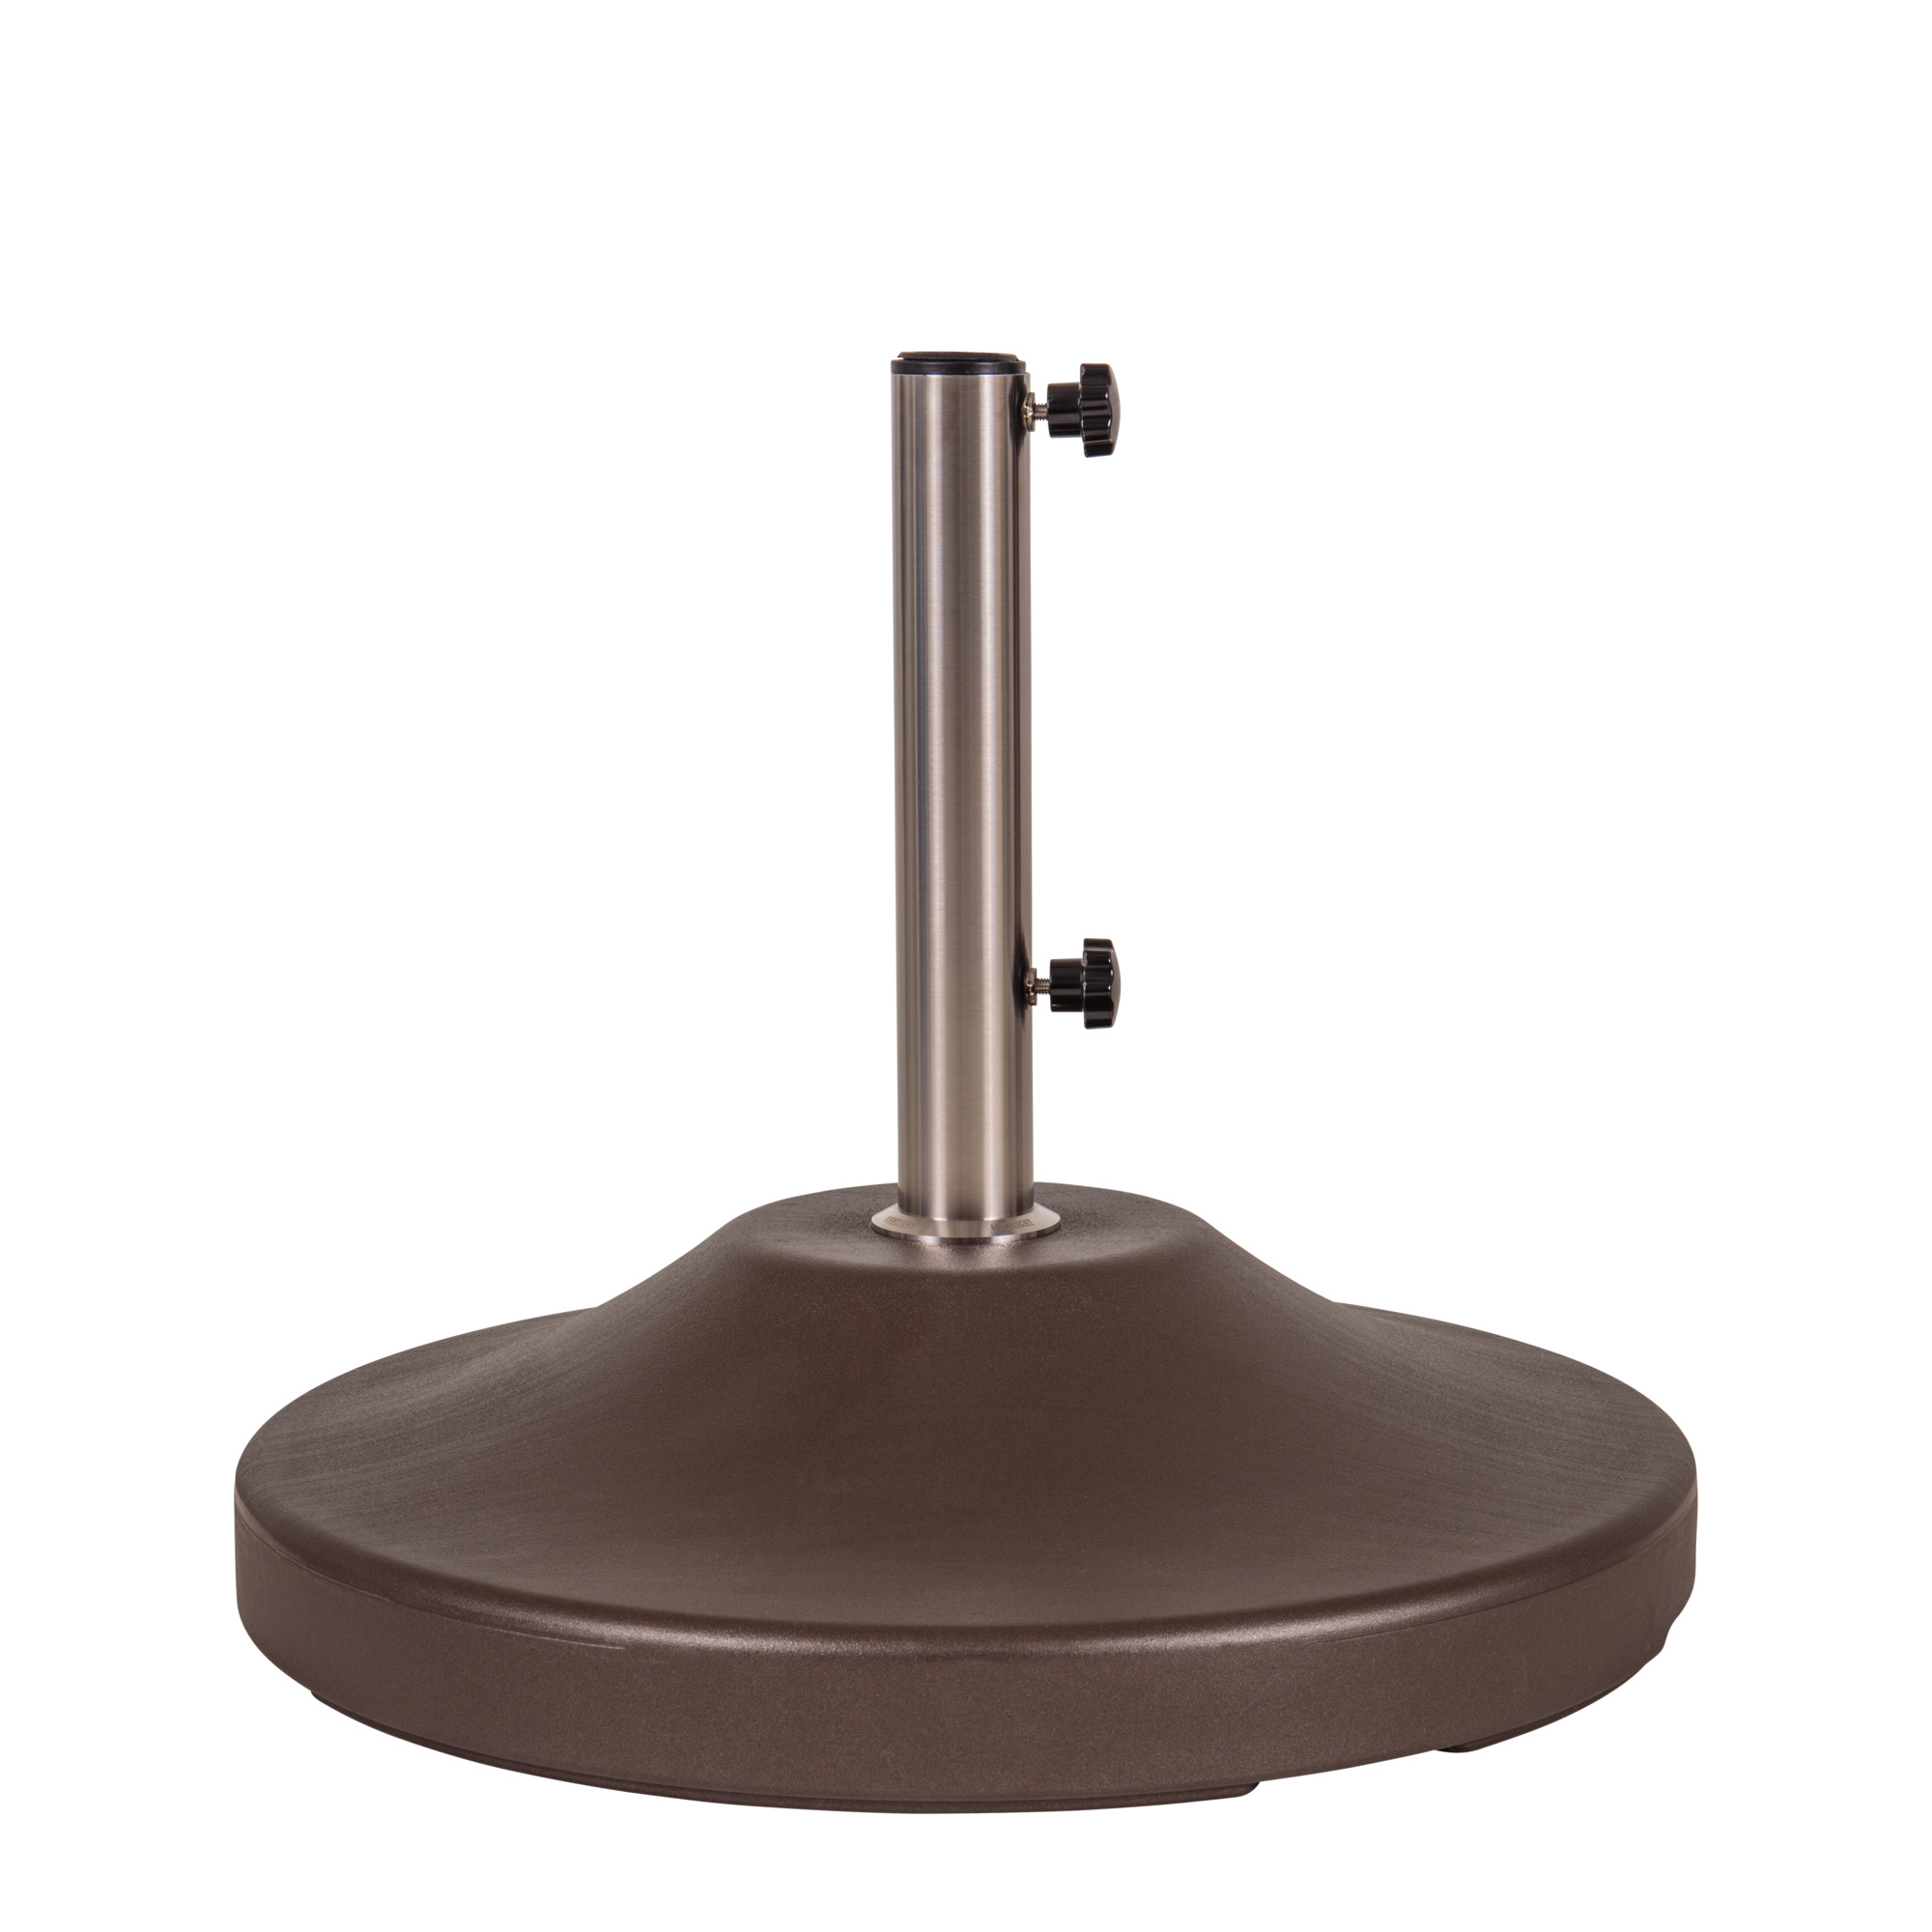 US Weight, 120 lb. Free Standing Umbrella Base (Bronze), Included (qty.) 1 Model FUB120BZ